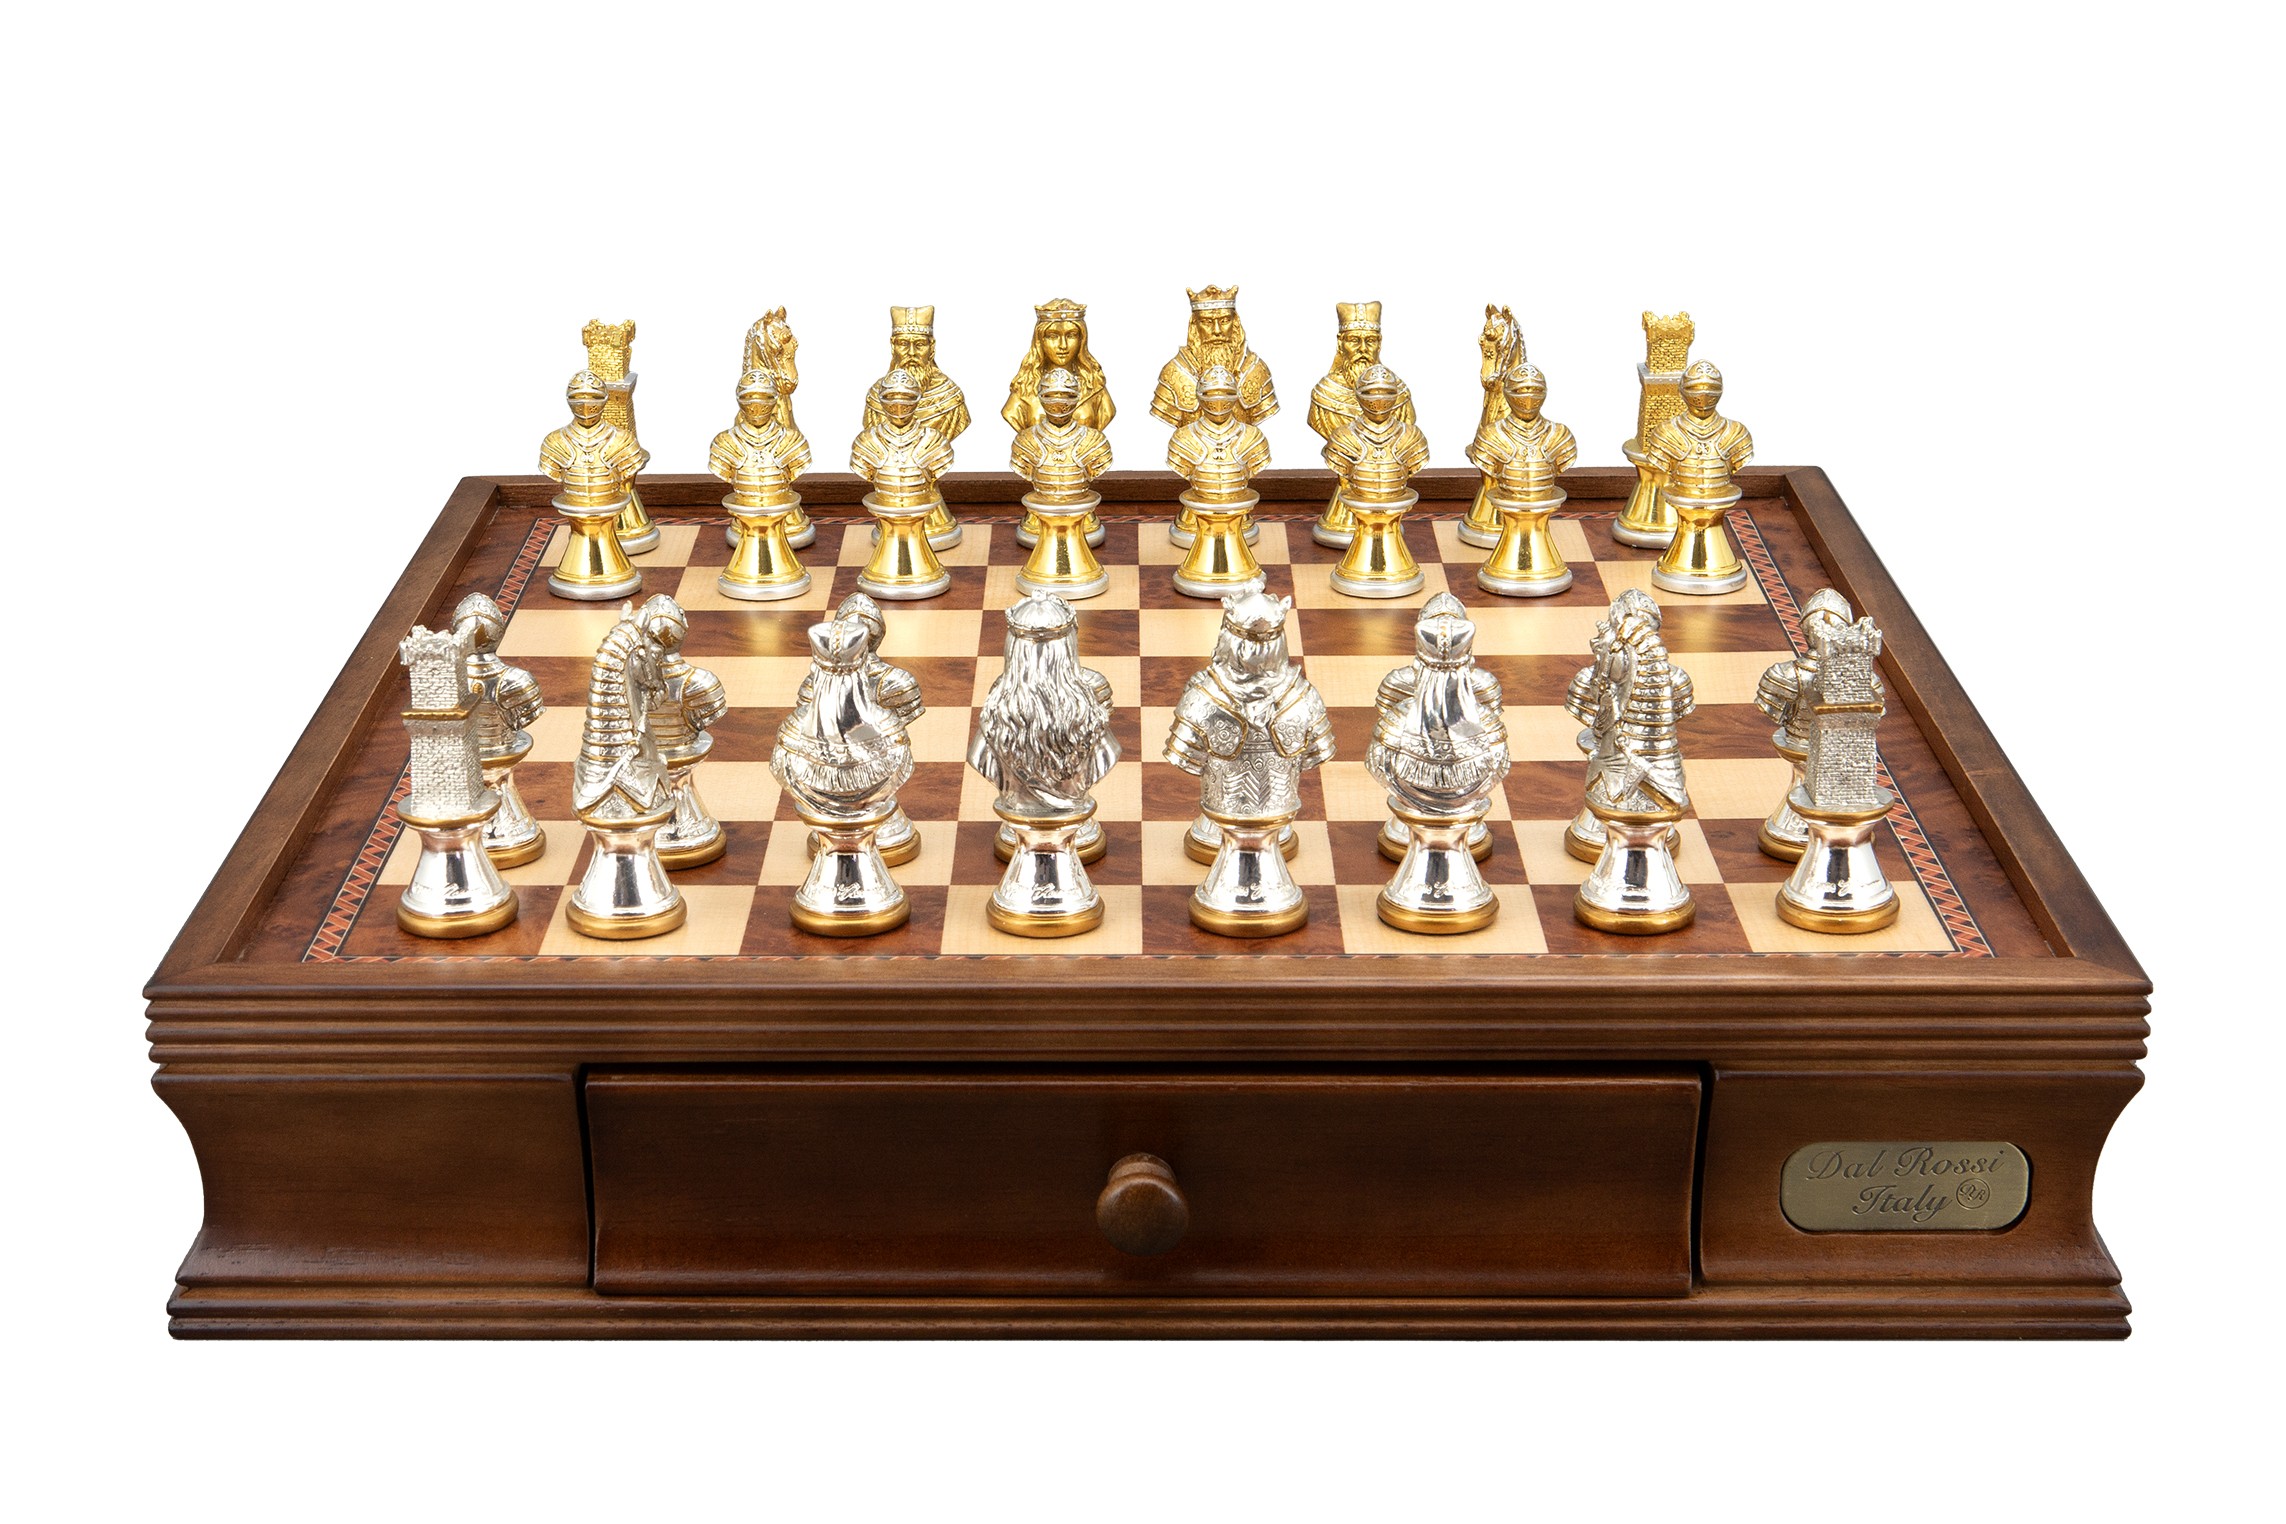 Dal Rossi Medieval Warriors Metal Chessmen 85mm on a Walnut Inlaid Chess Box with Drawers 16"